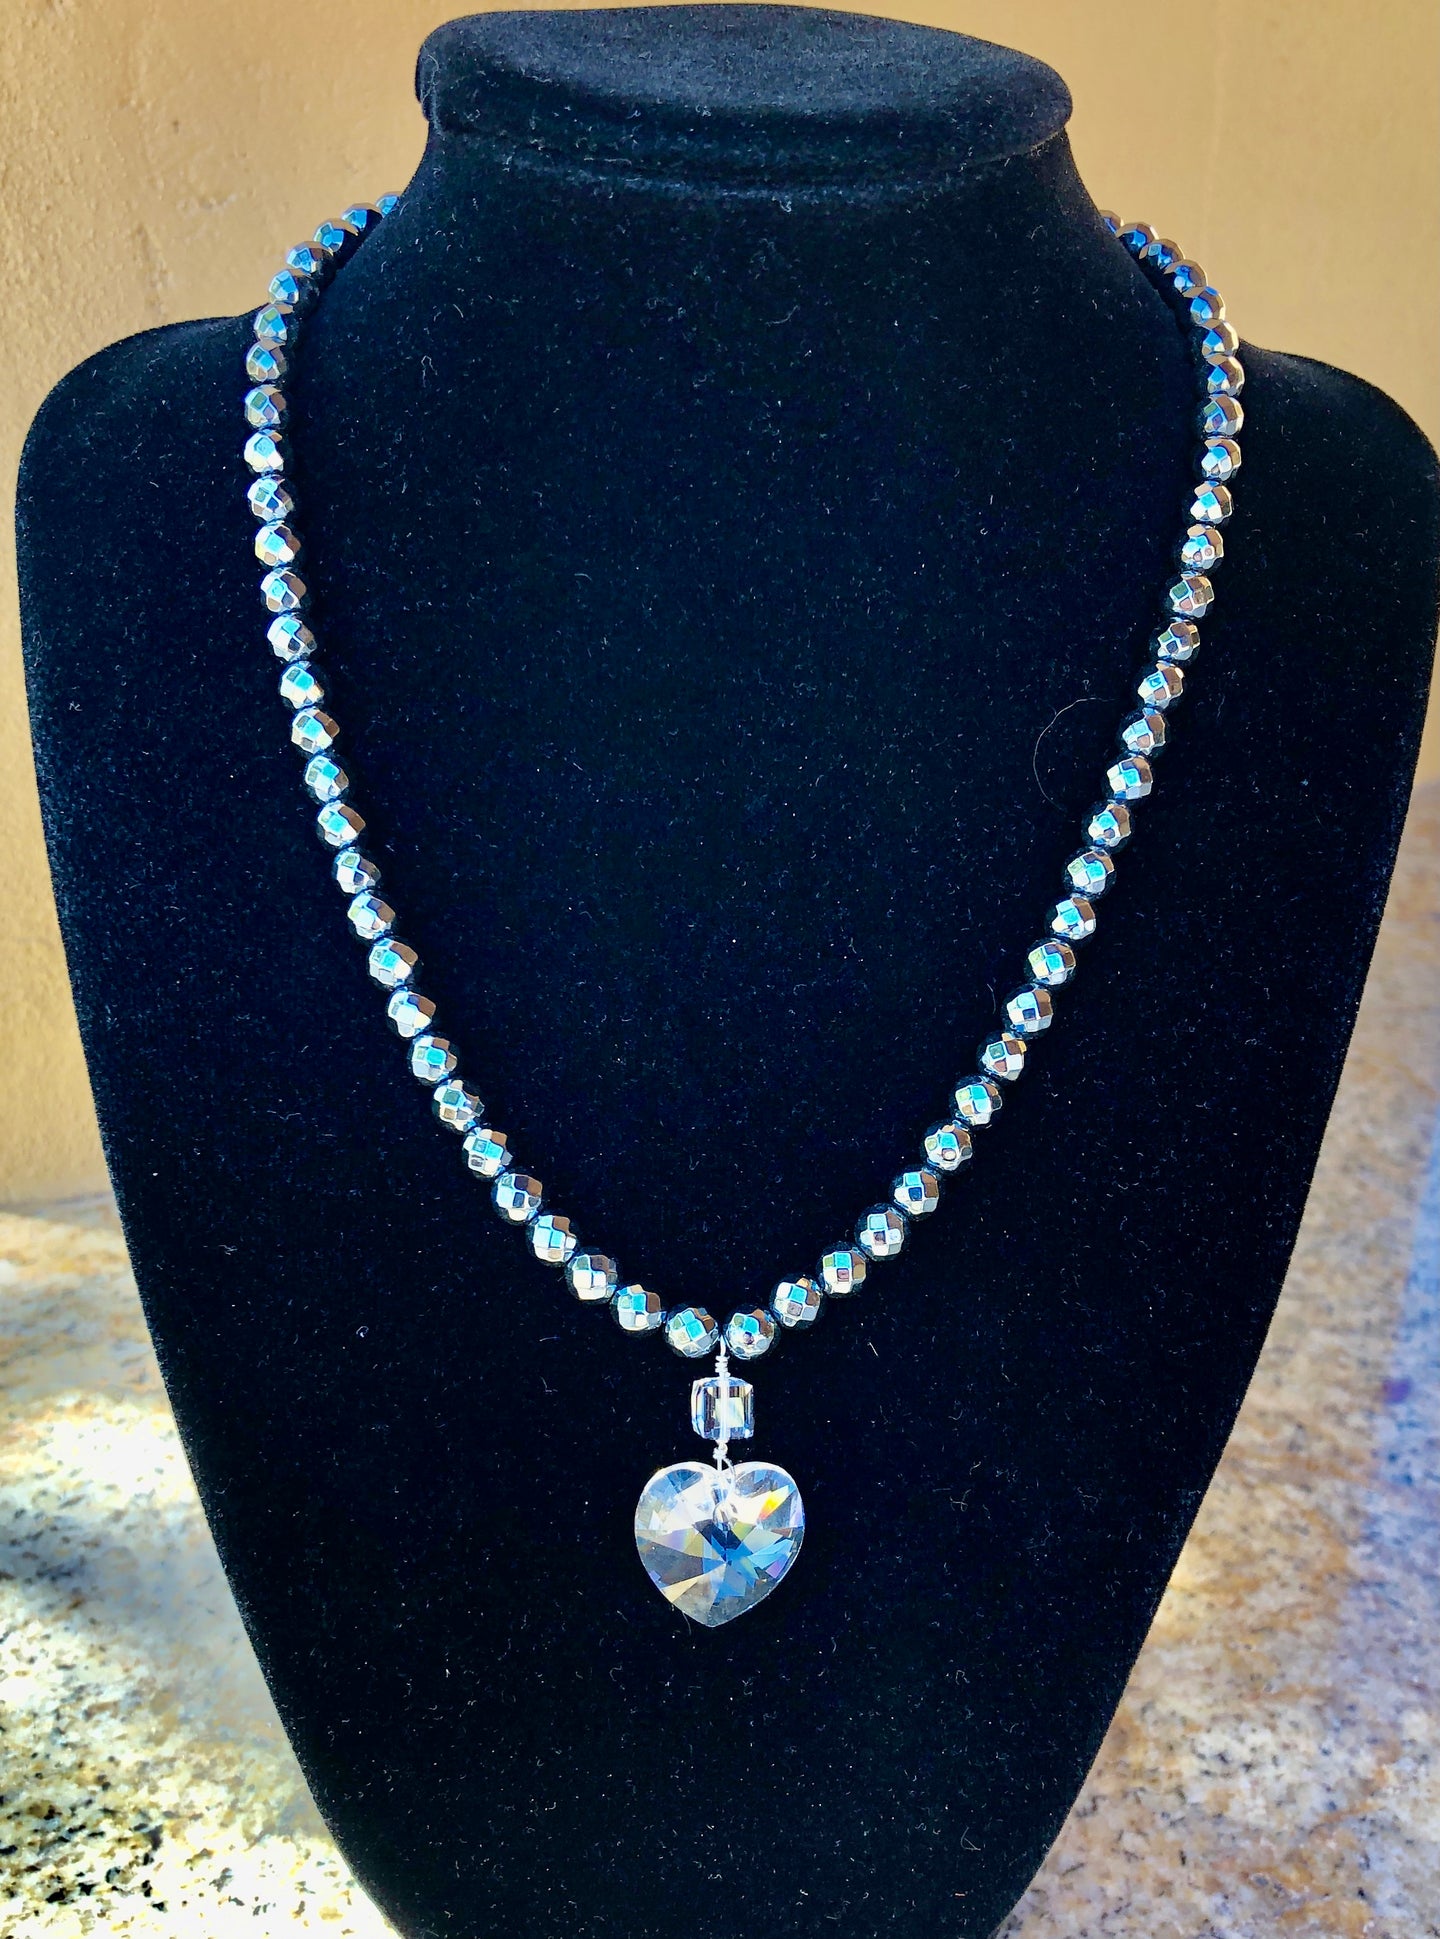 Necklace - Faceted Hematite, Sterling Silver Clasp, Swarovski Heart Pendant